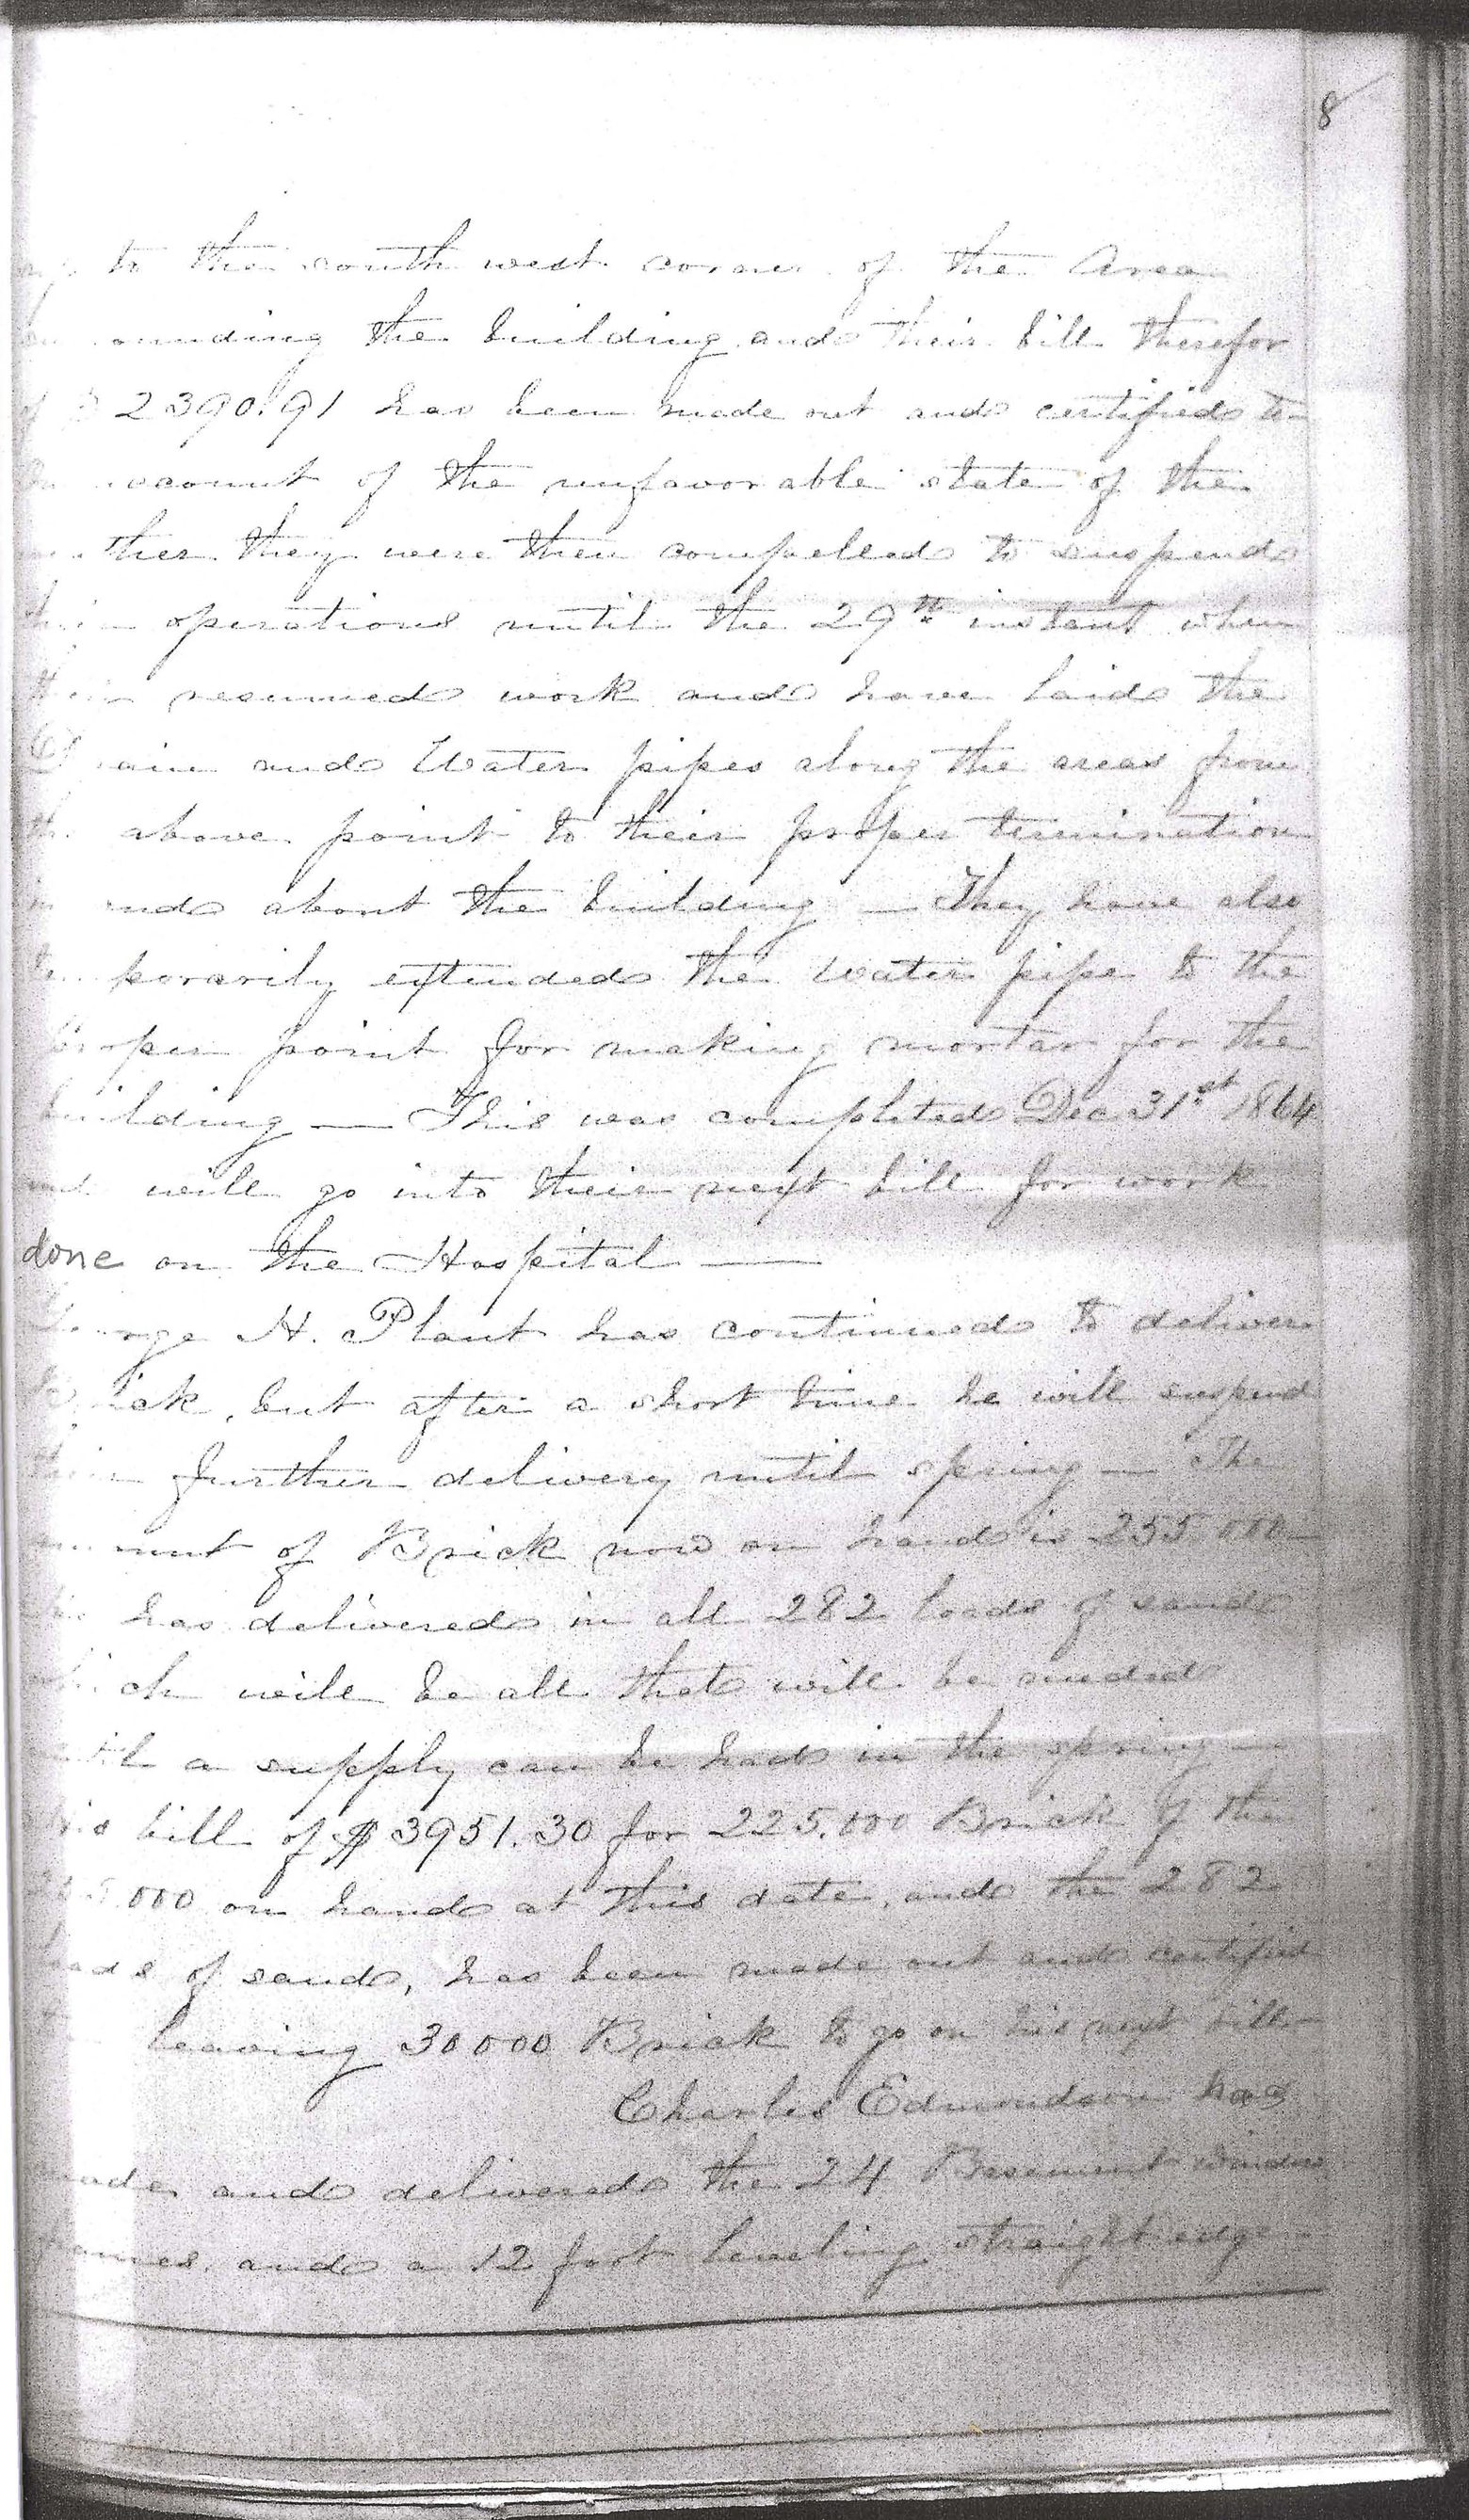 Monthly Report of the Superintendent of Construction, January 2, 1865, Page 2 of 4